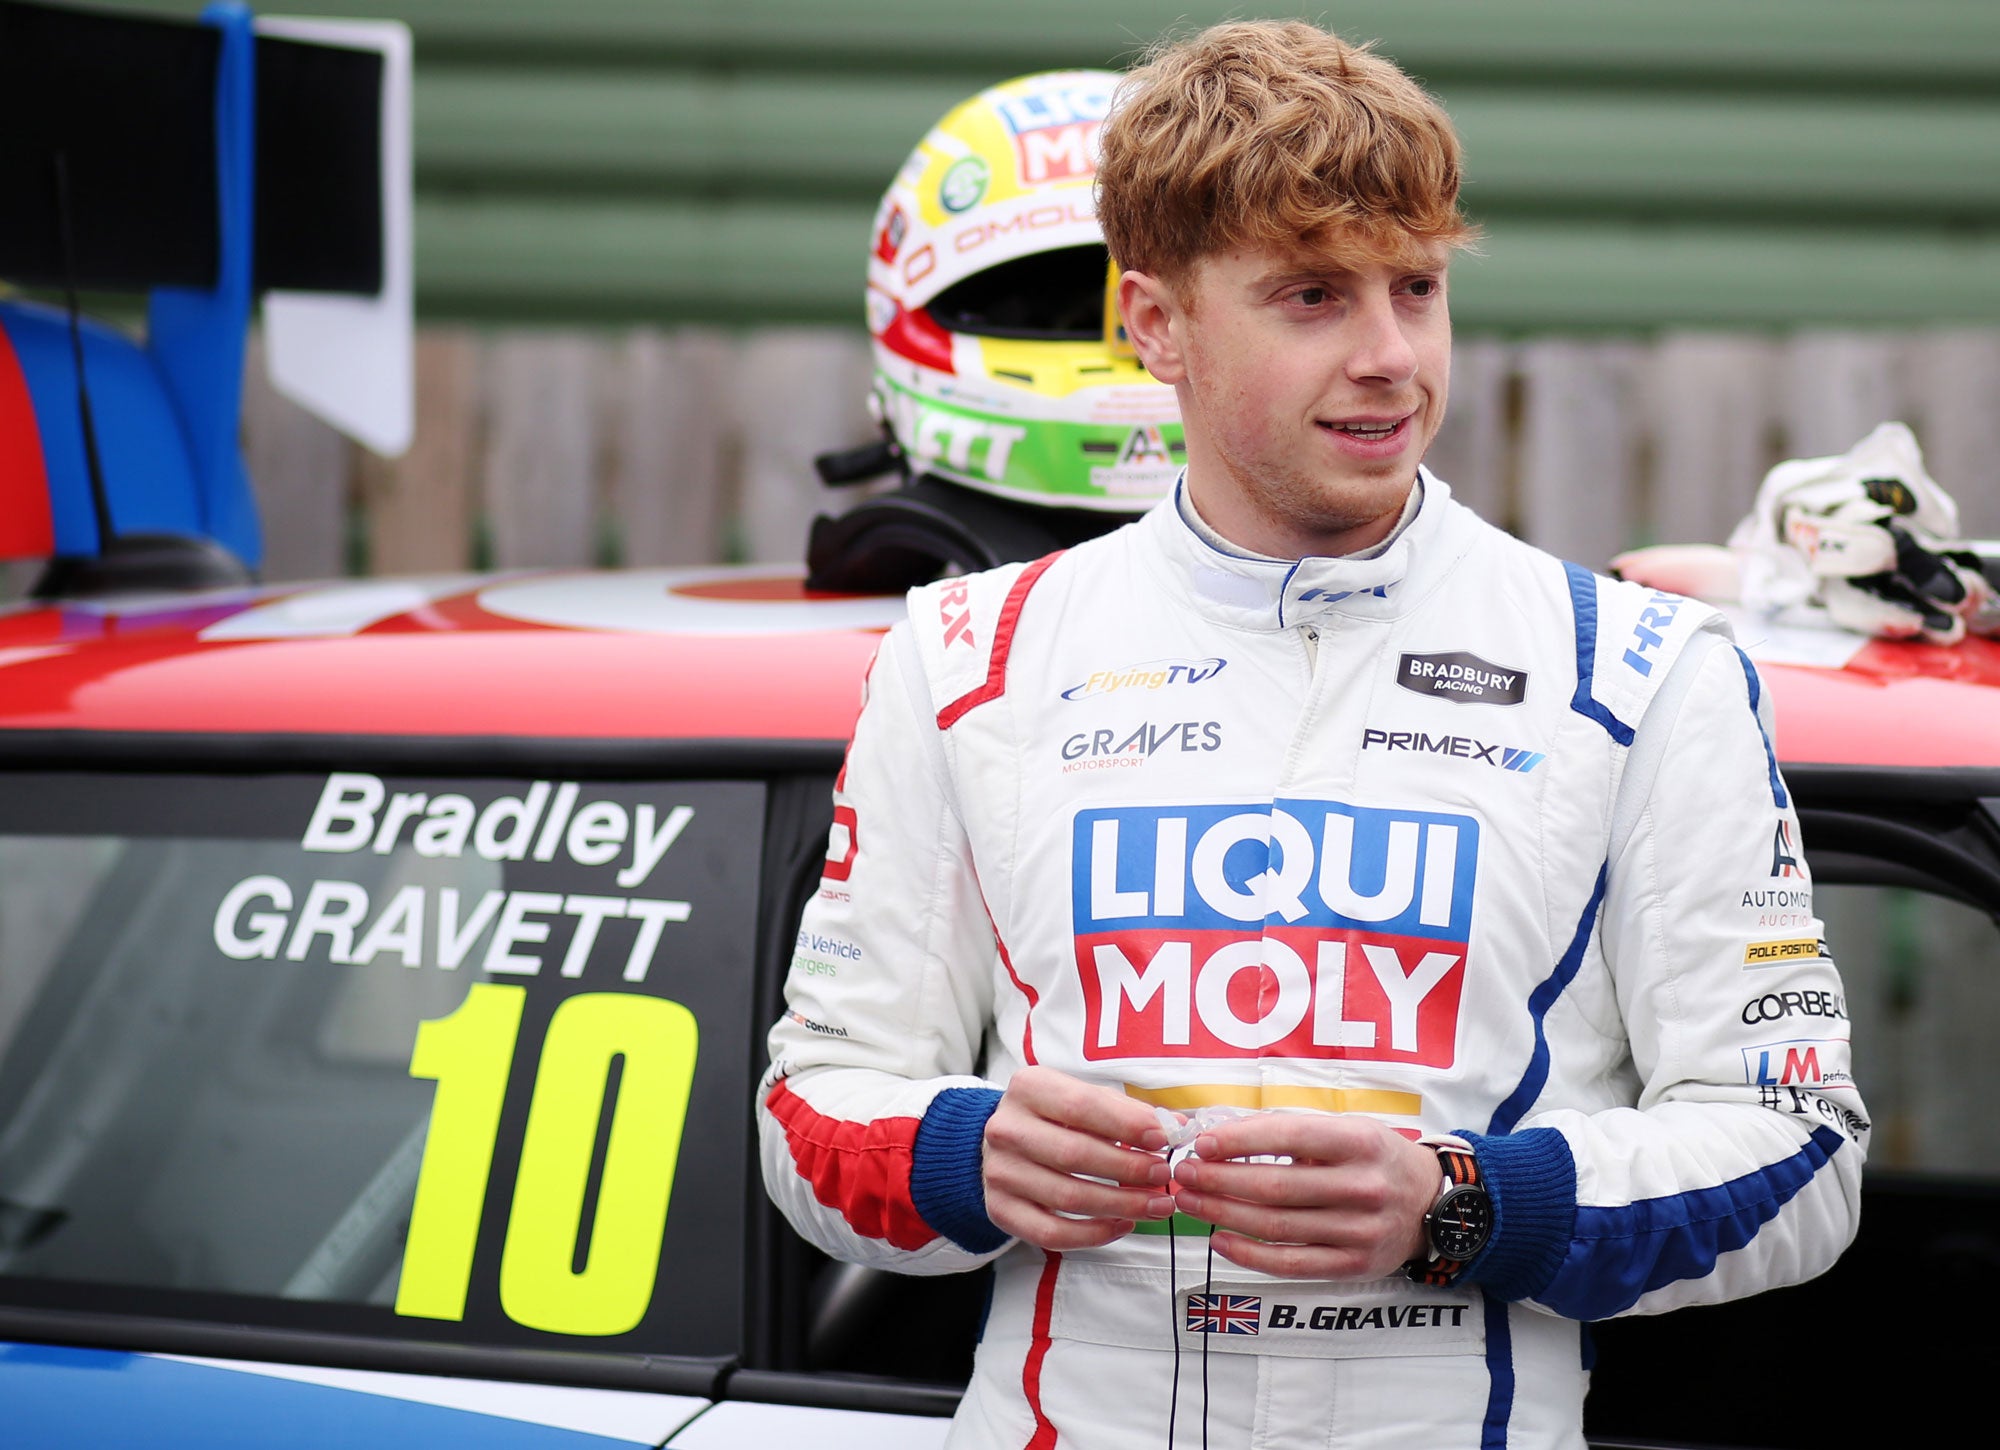 Bradley Gravett son of BTCC British Touring Car Champion Robb Gravett in the MINI Challenge JCW Series at Knockhill in 2021 Brad Standing in Front of Race Car Graves Motorsport Cooper Racing Driver LIQUI MOLY LM Performance Thinking it Better